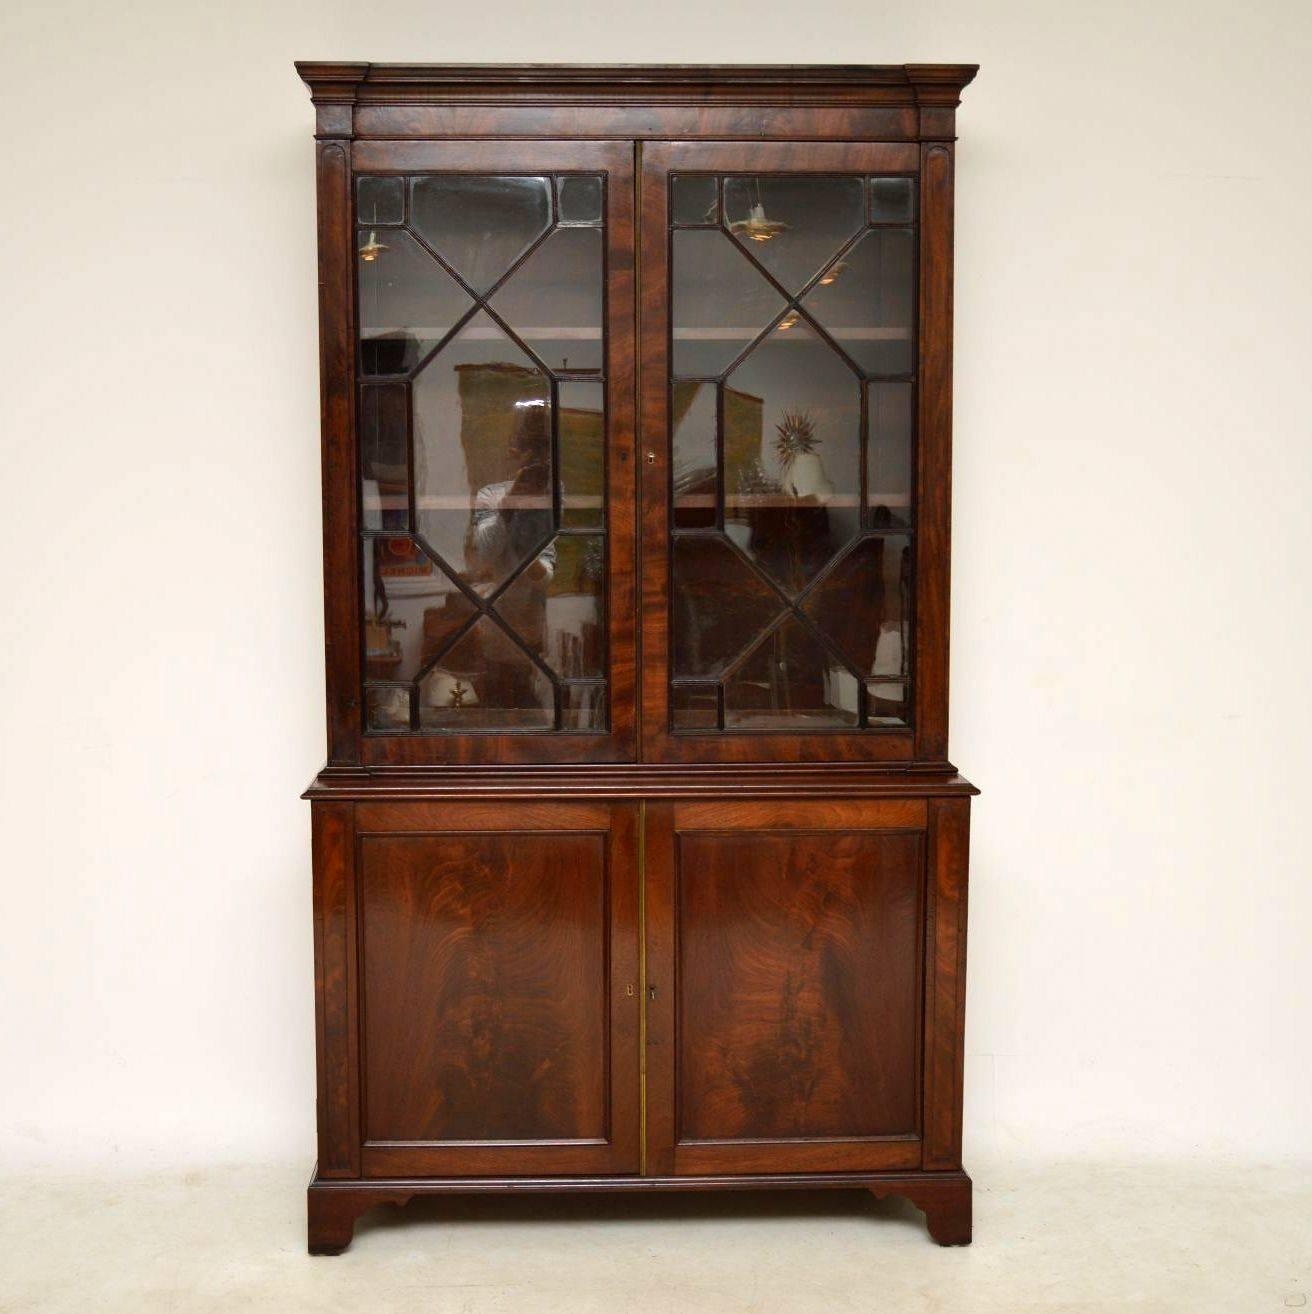 This antique William IV mahogany two section library bookcase dates from circa 1830s period and is in good original condition. The top section has two astral glazed doors with reeded sections of mahogany between the glass. The glass panels are